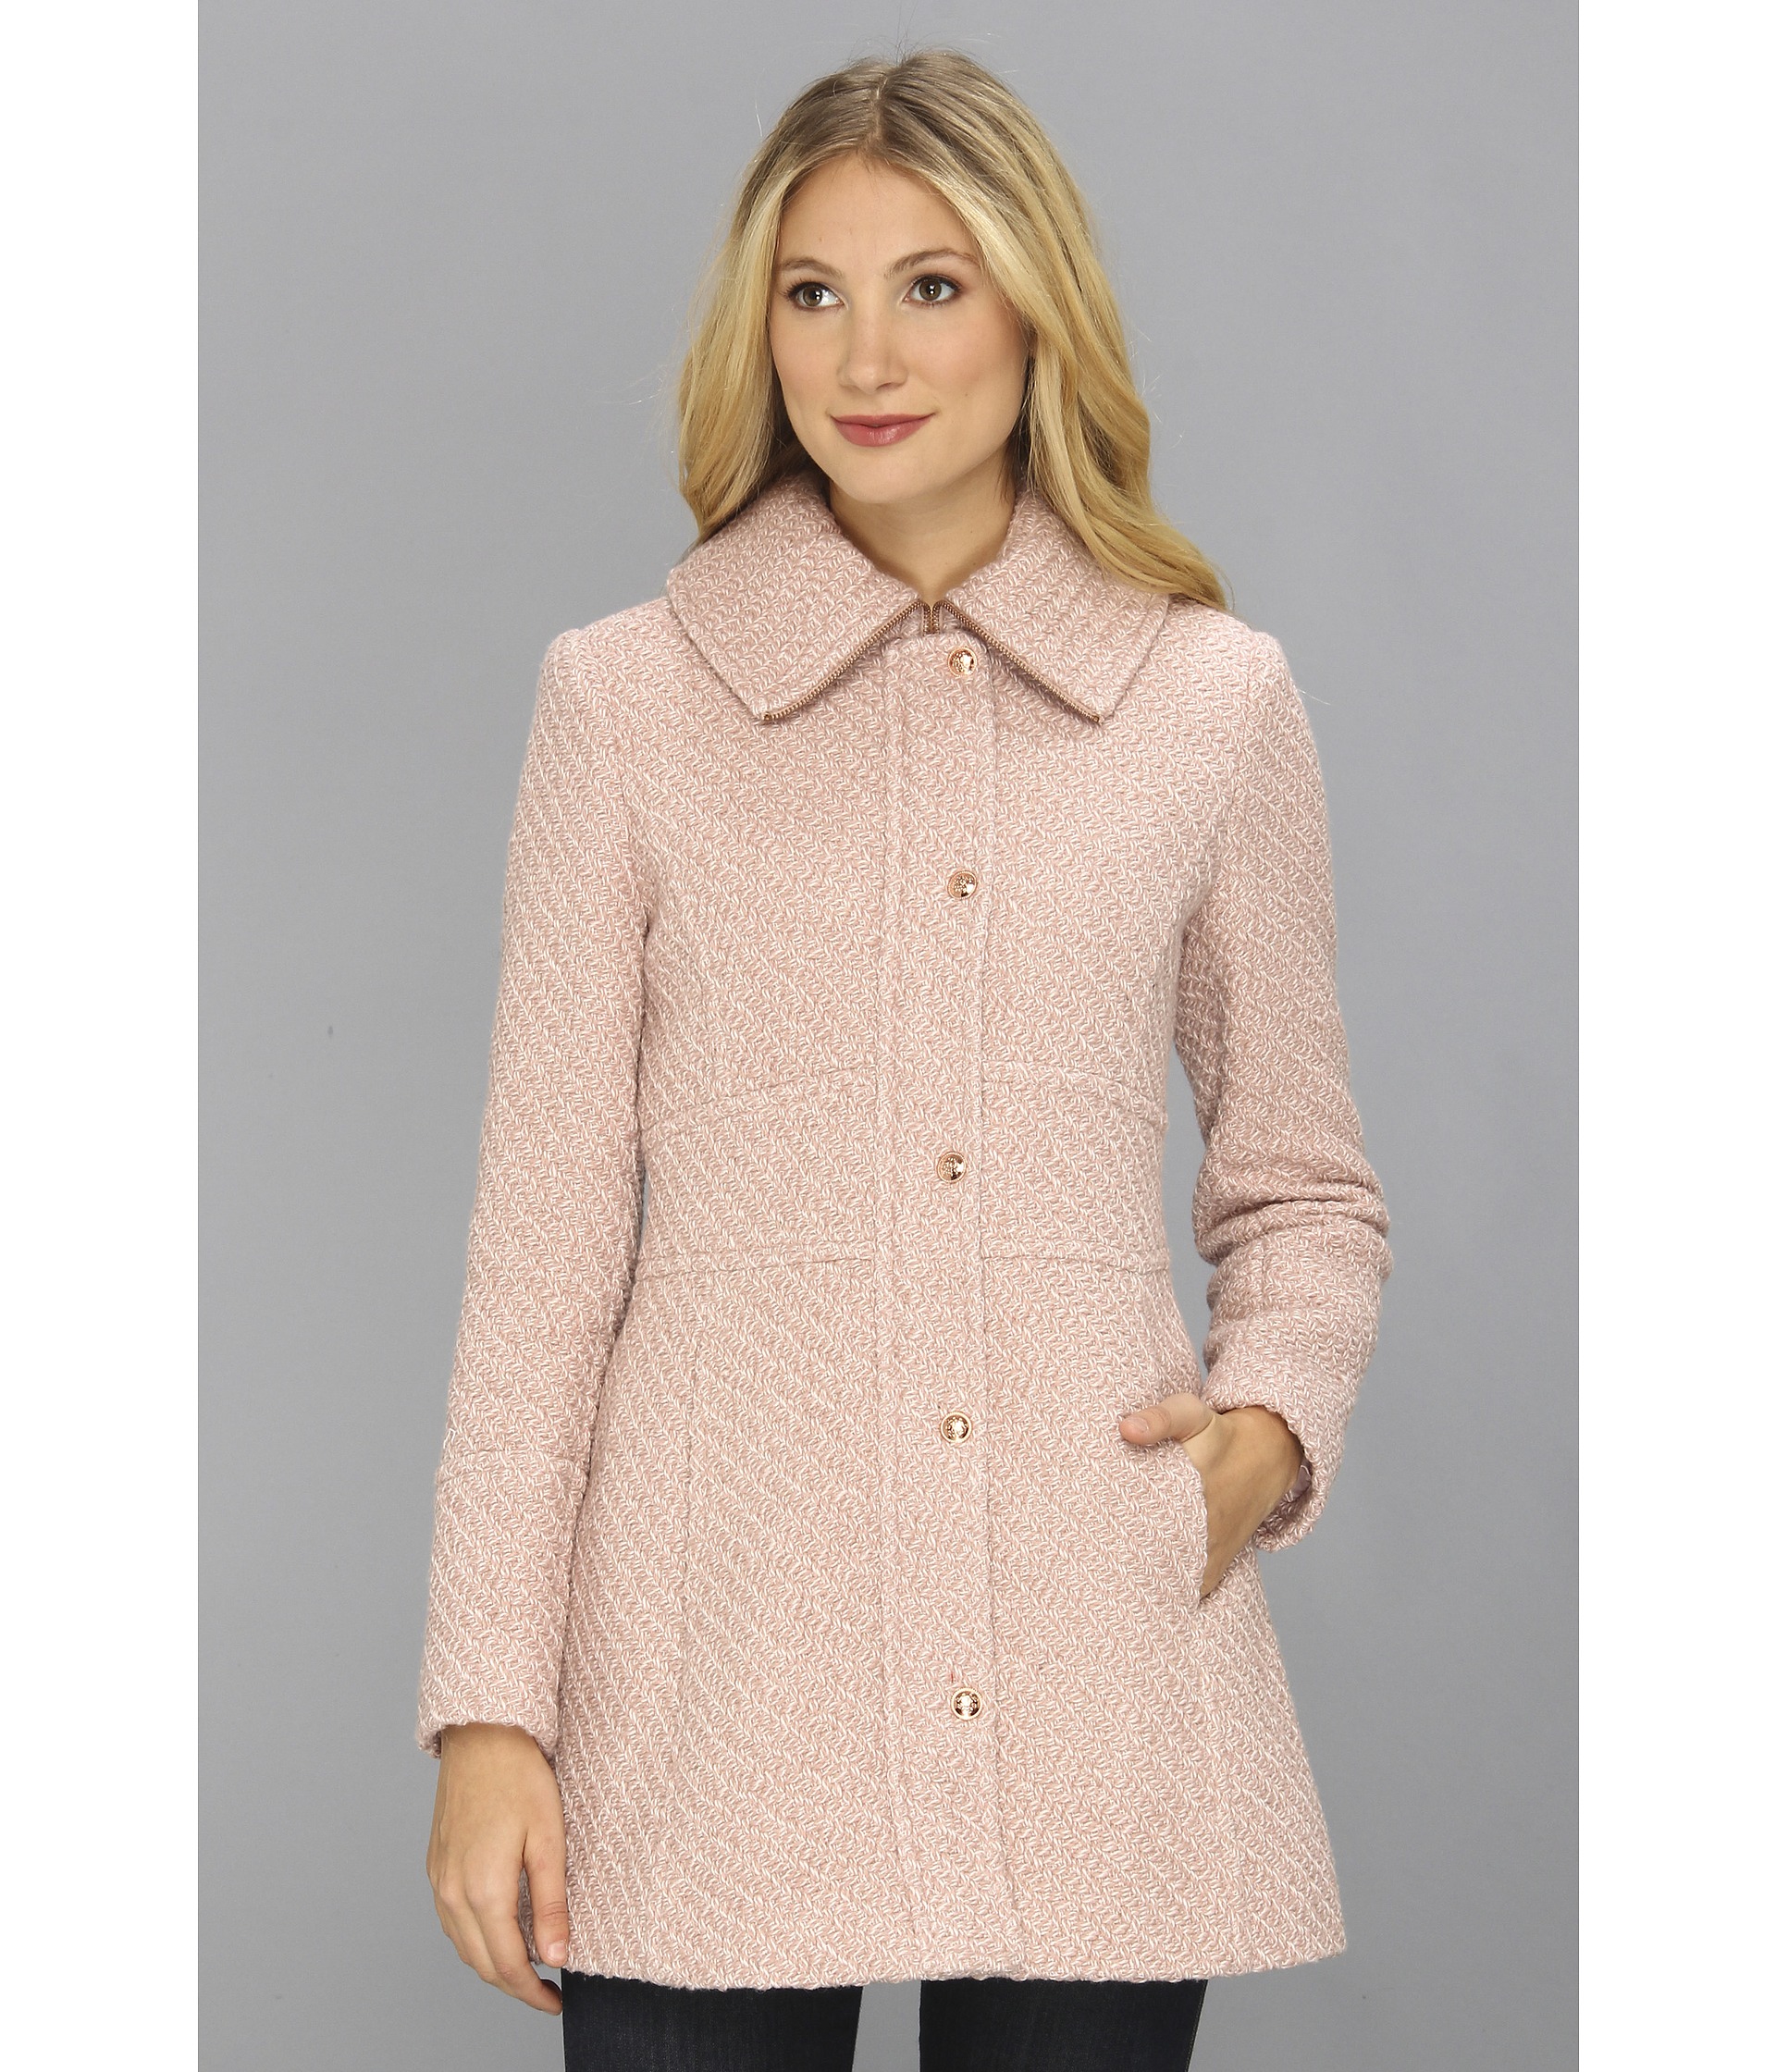 Jessica Simpson Textured Wool Coat | Shipped Free at Zappos